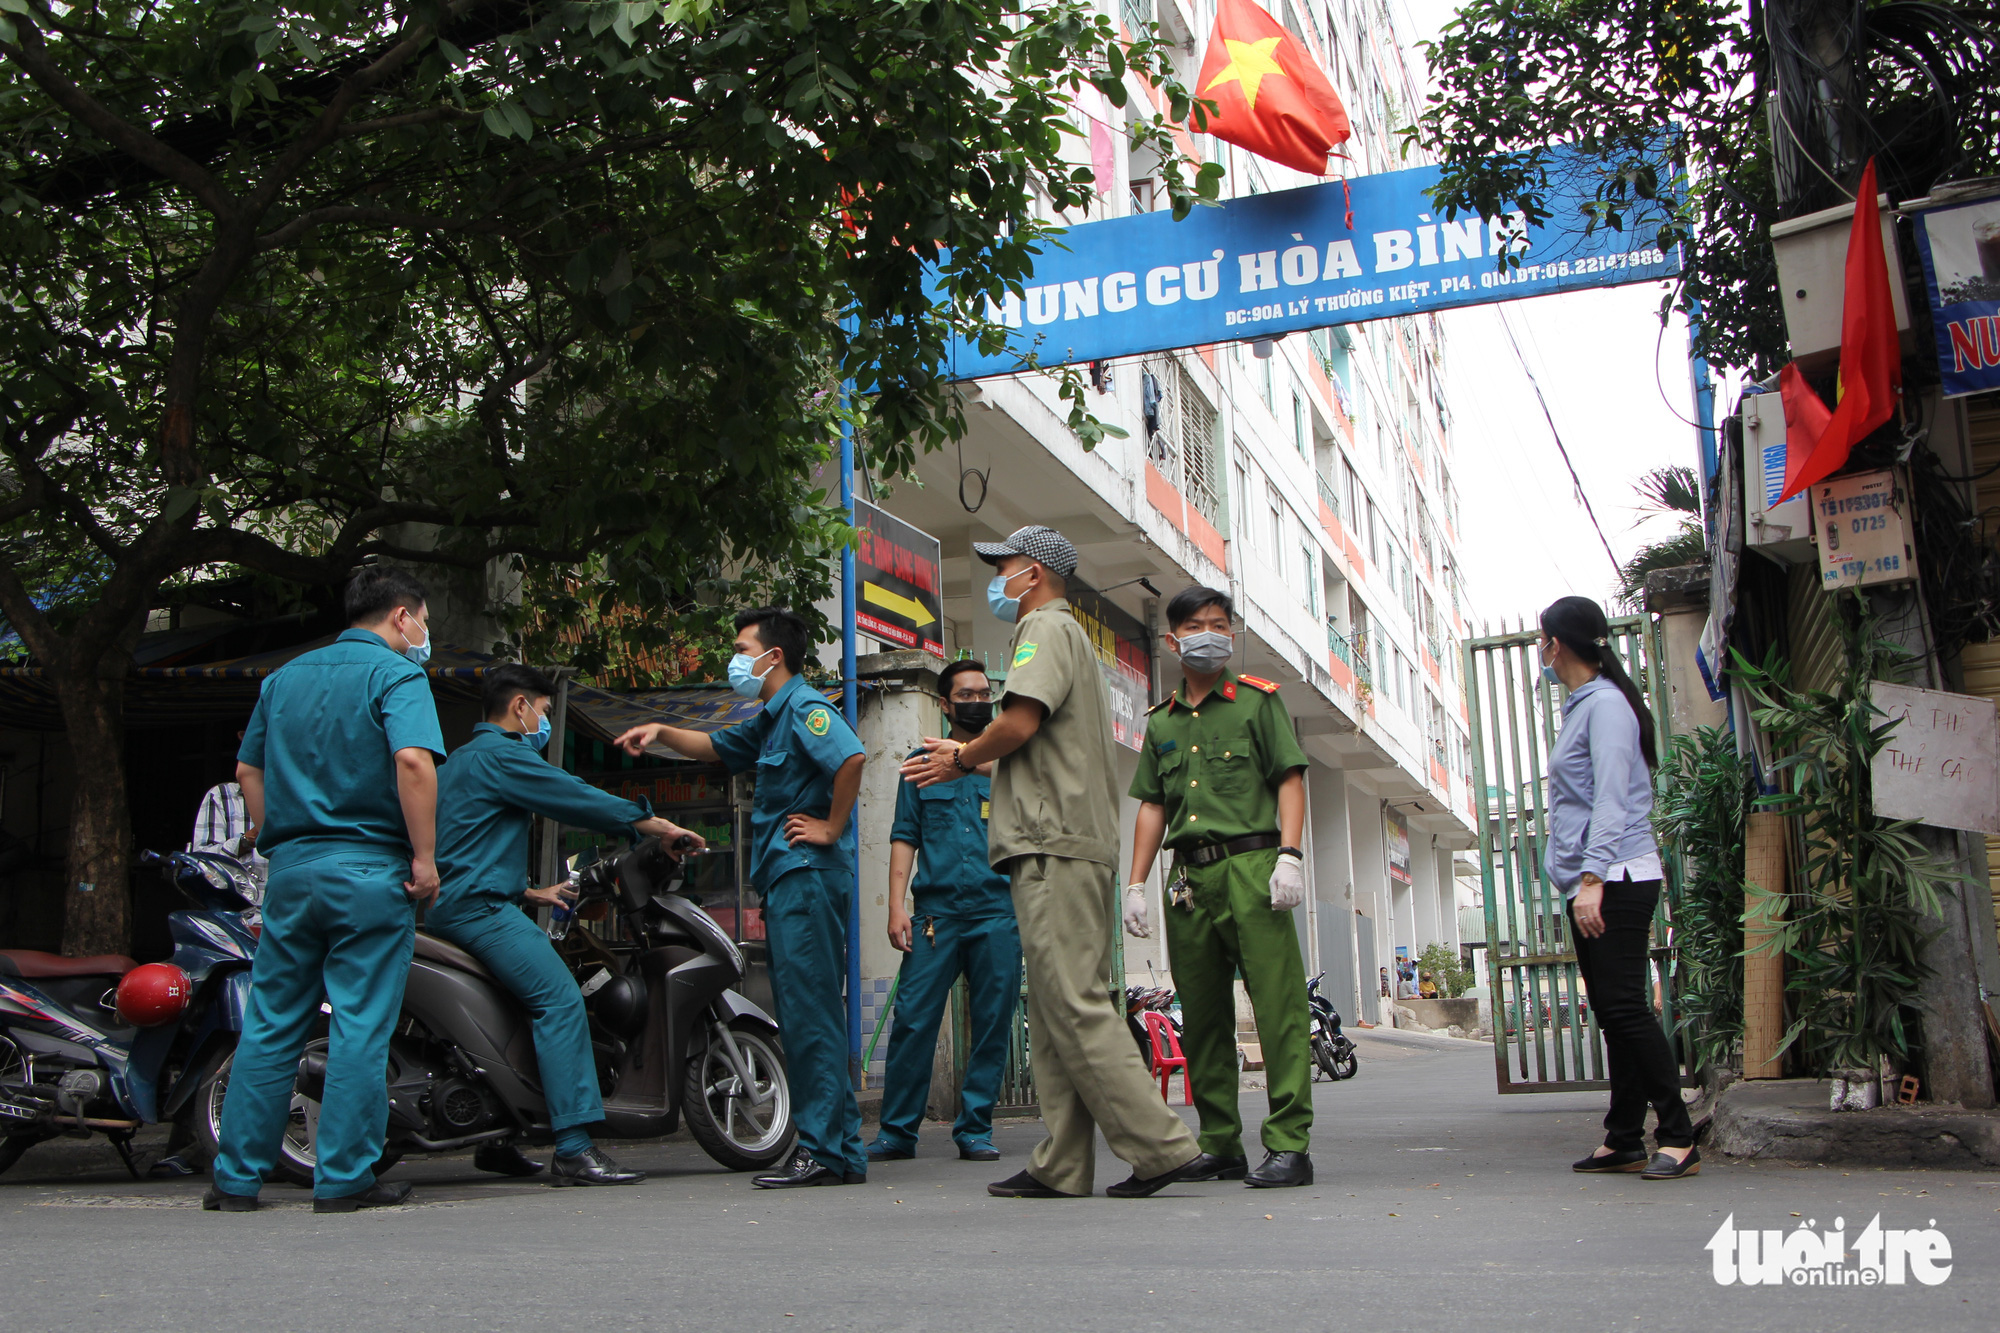 Ho Chi Minh City apartment building locked down after resident tests positive for COVID-19